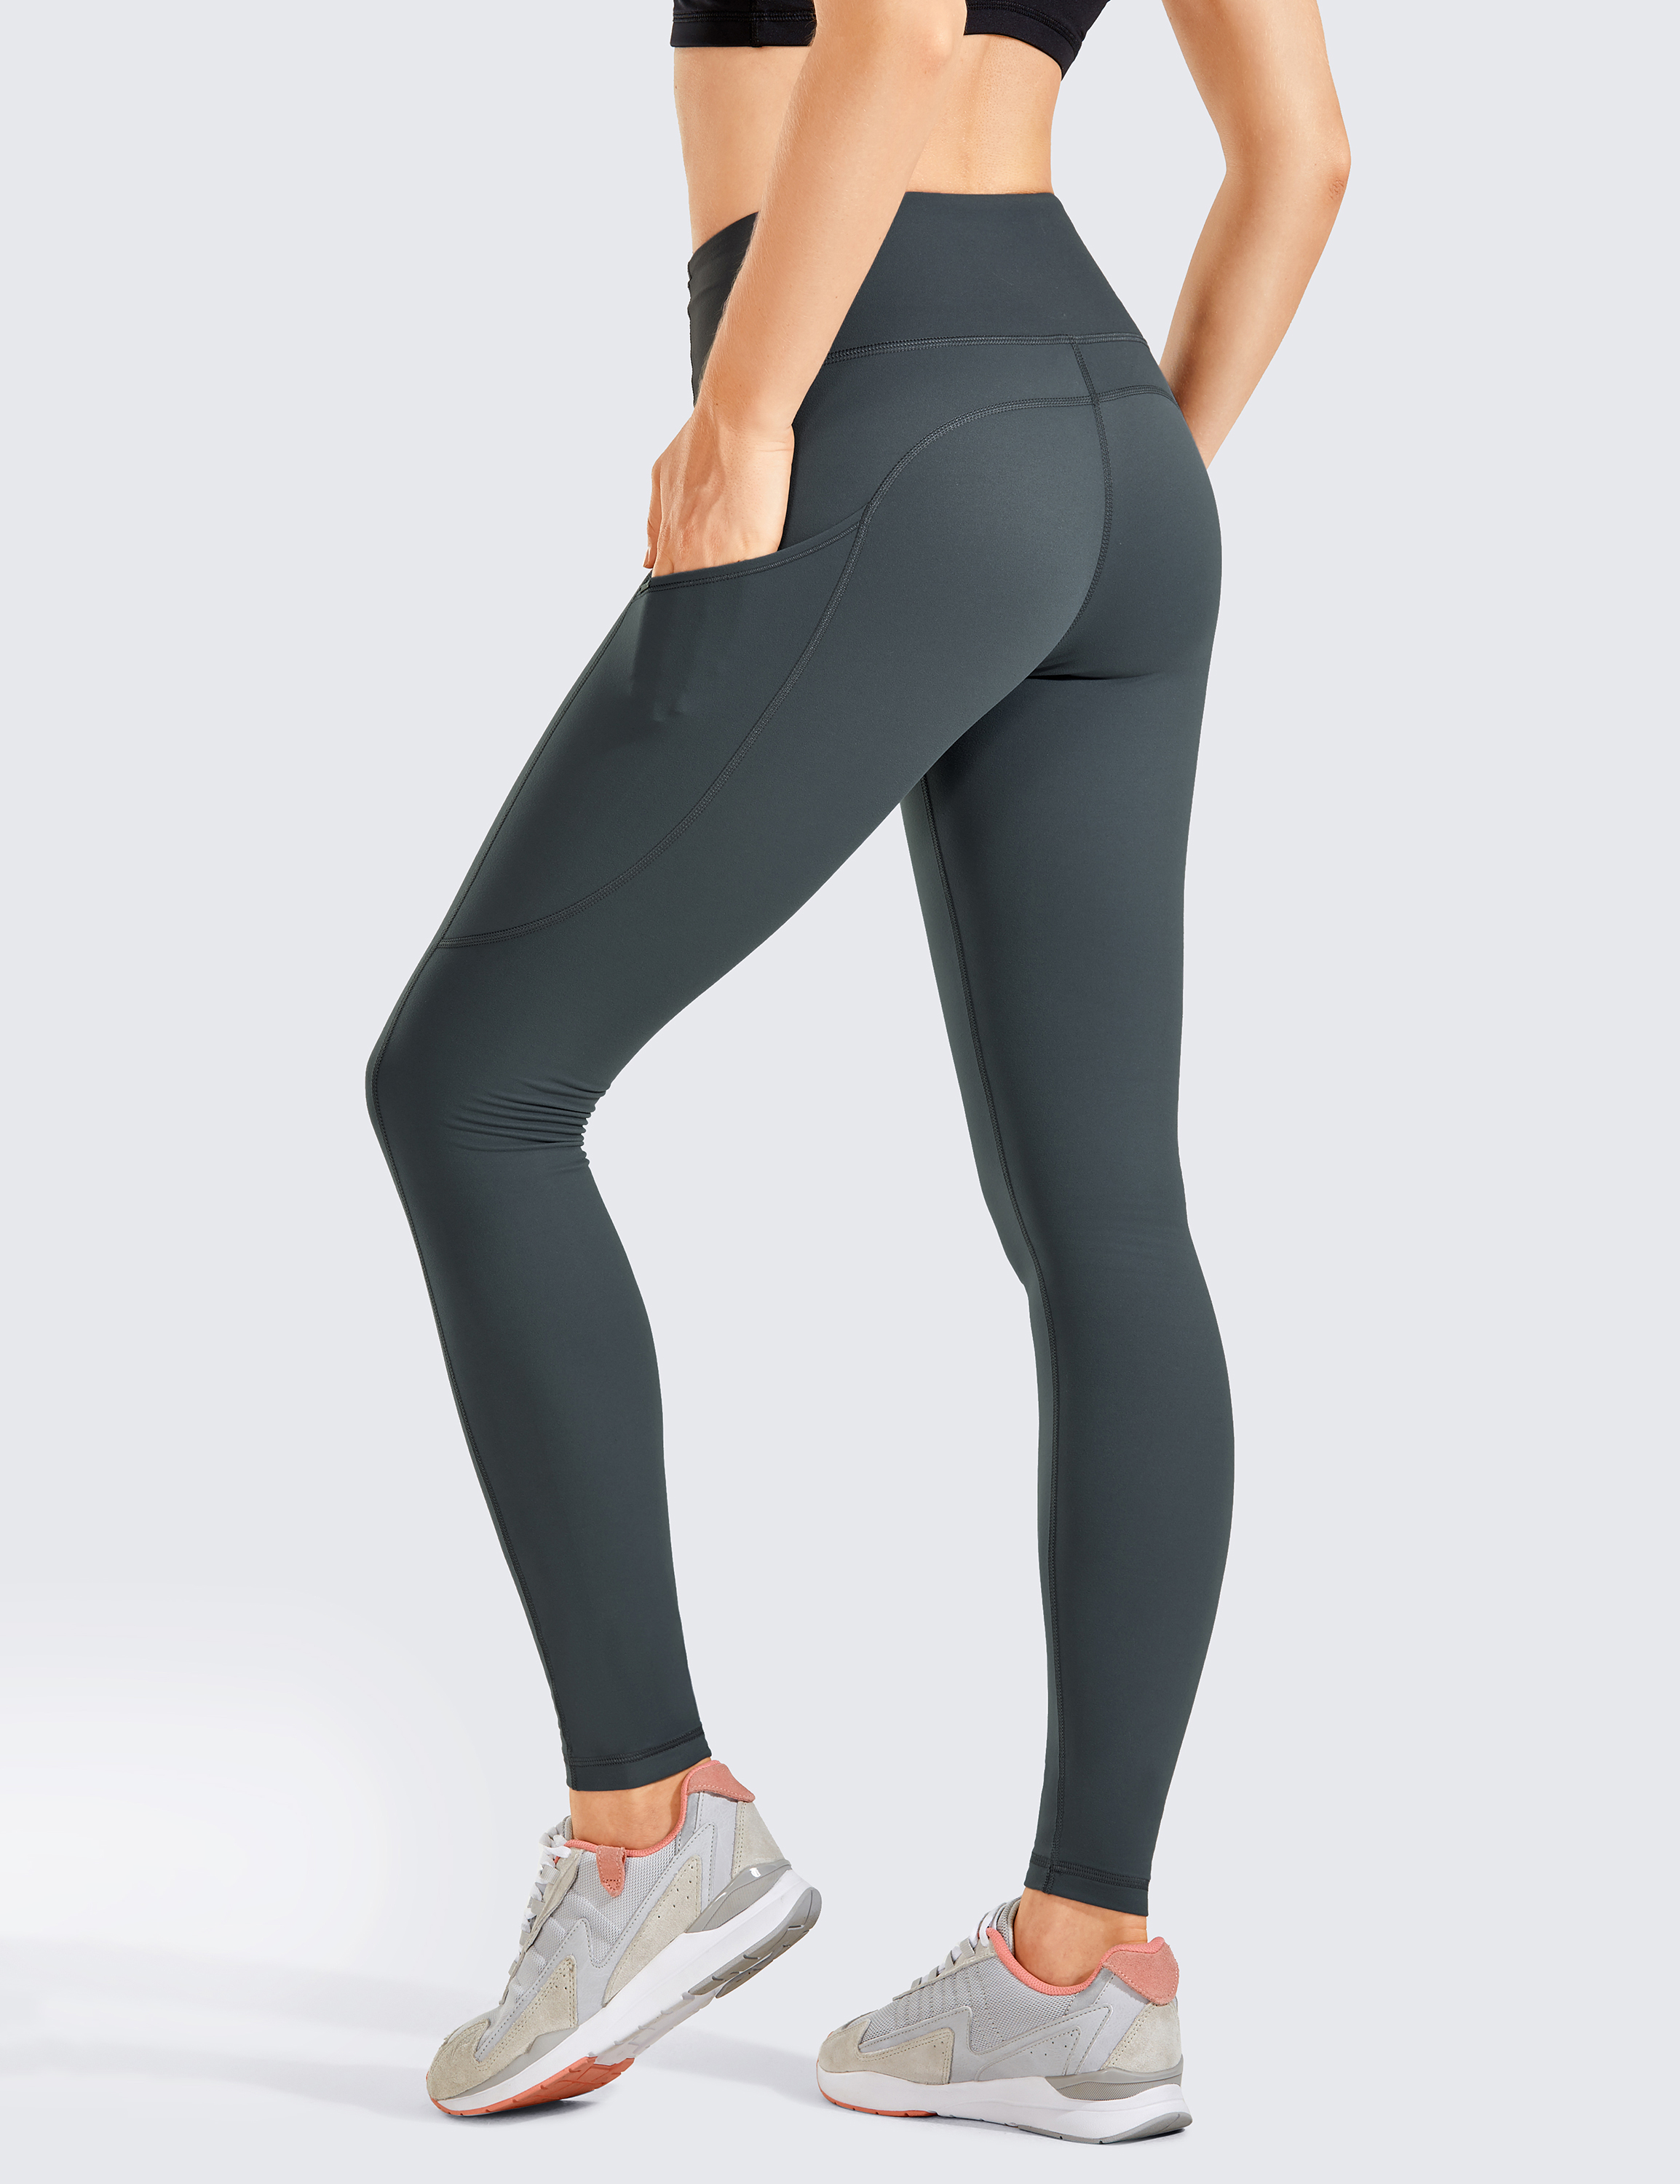 Crz Yoga Pants Women  International Society of Precision Agriculture